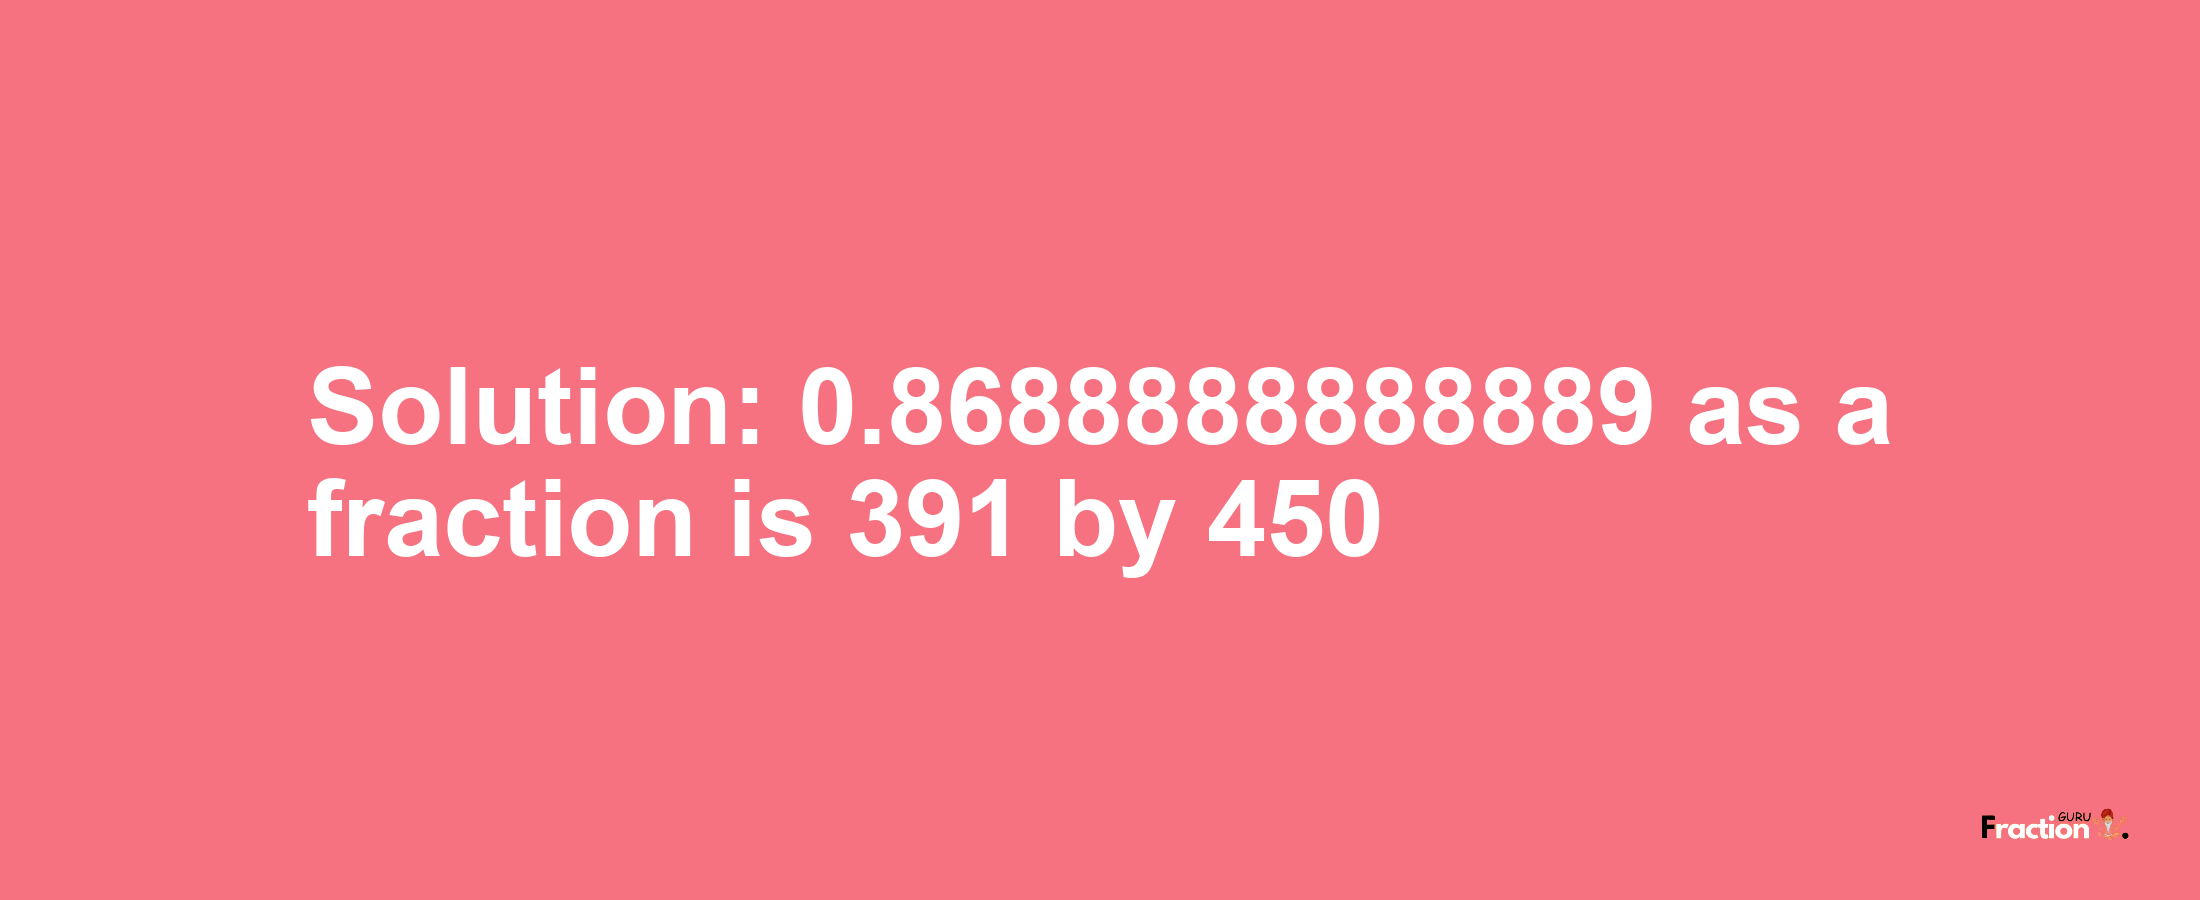 Solution:0.8688888888889 as a fraction is 391/450